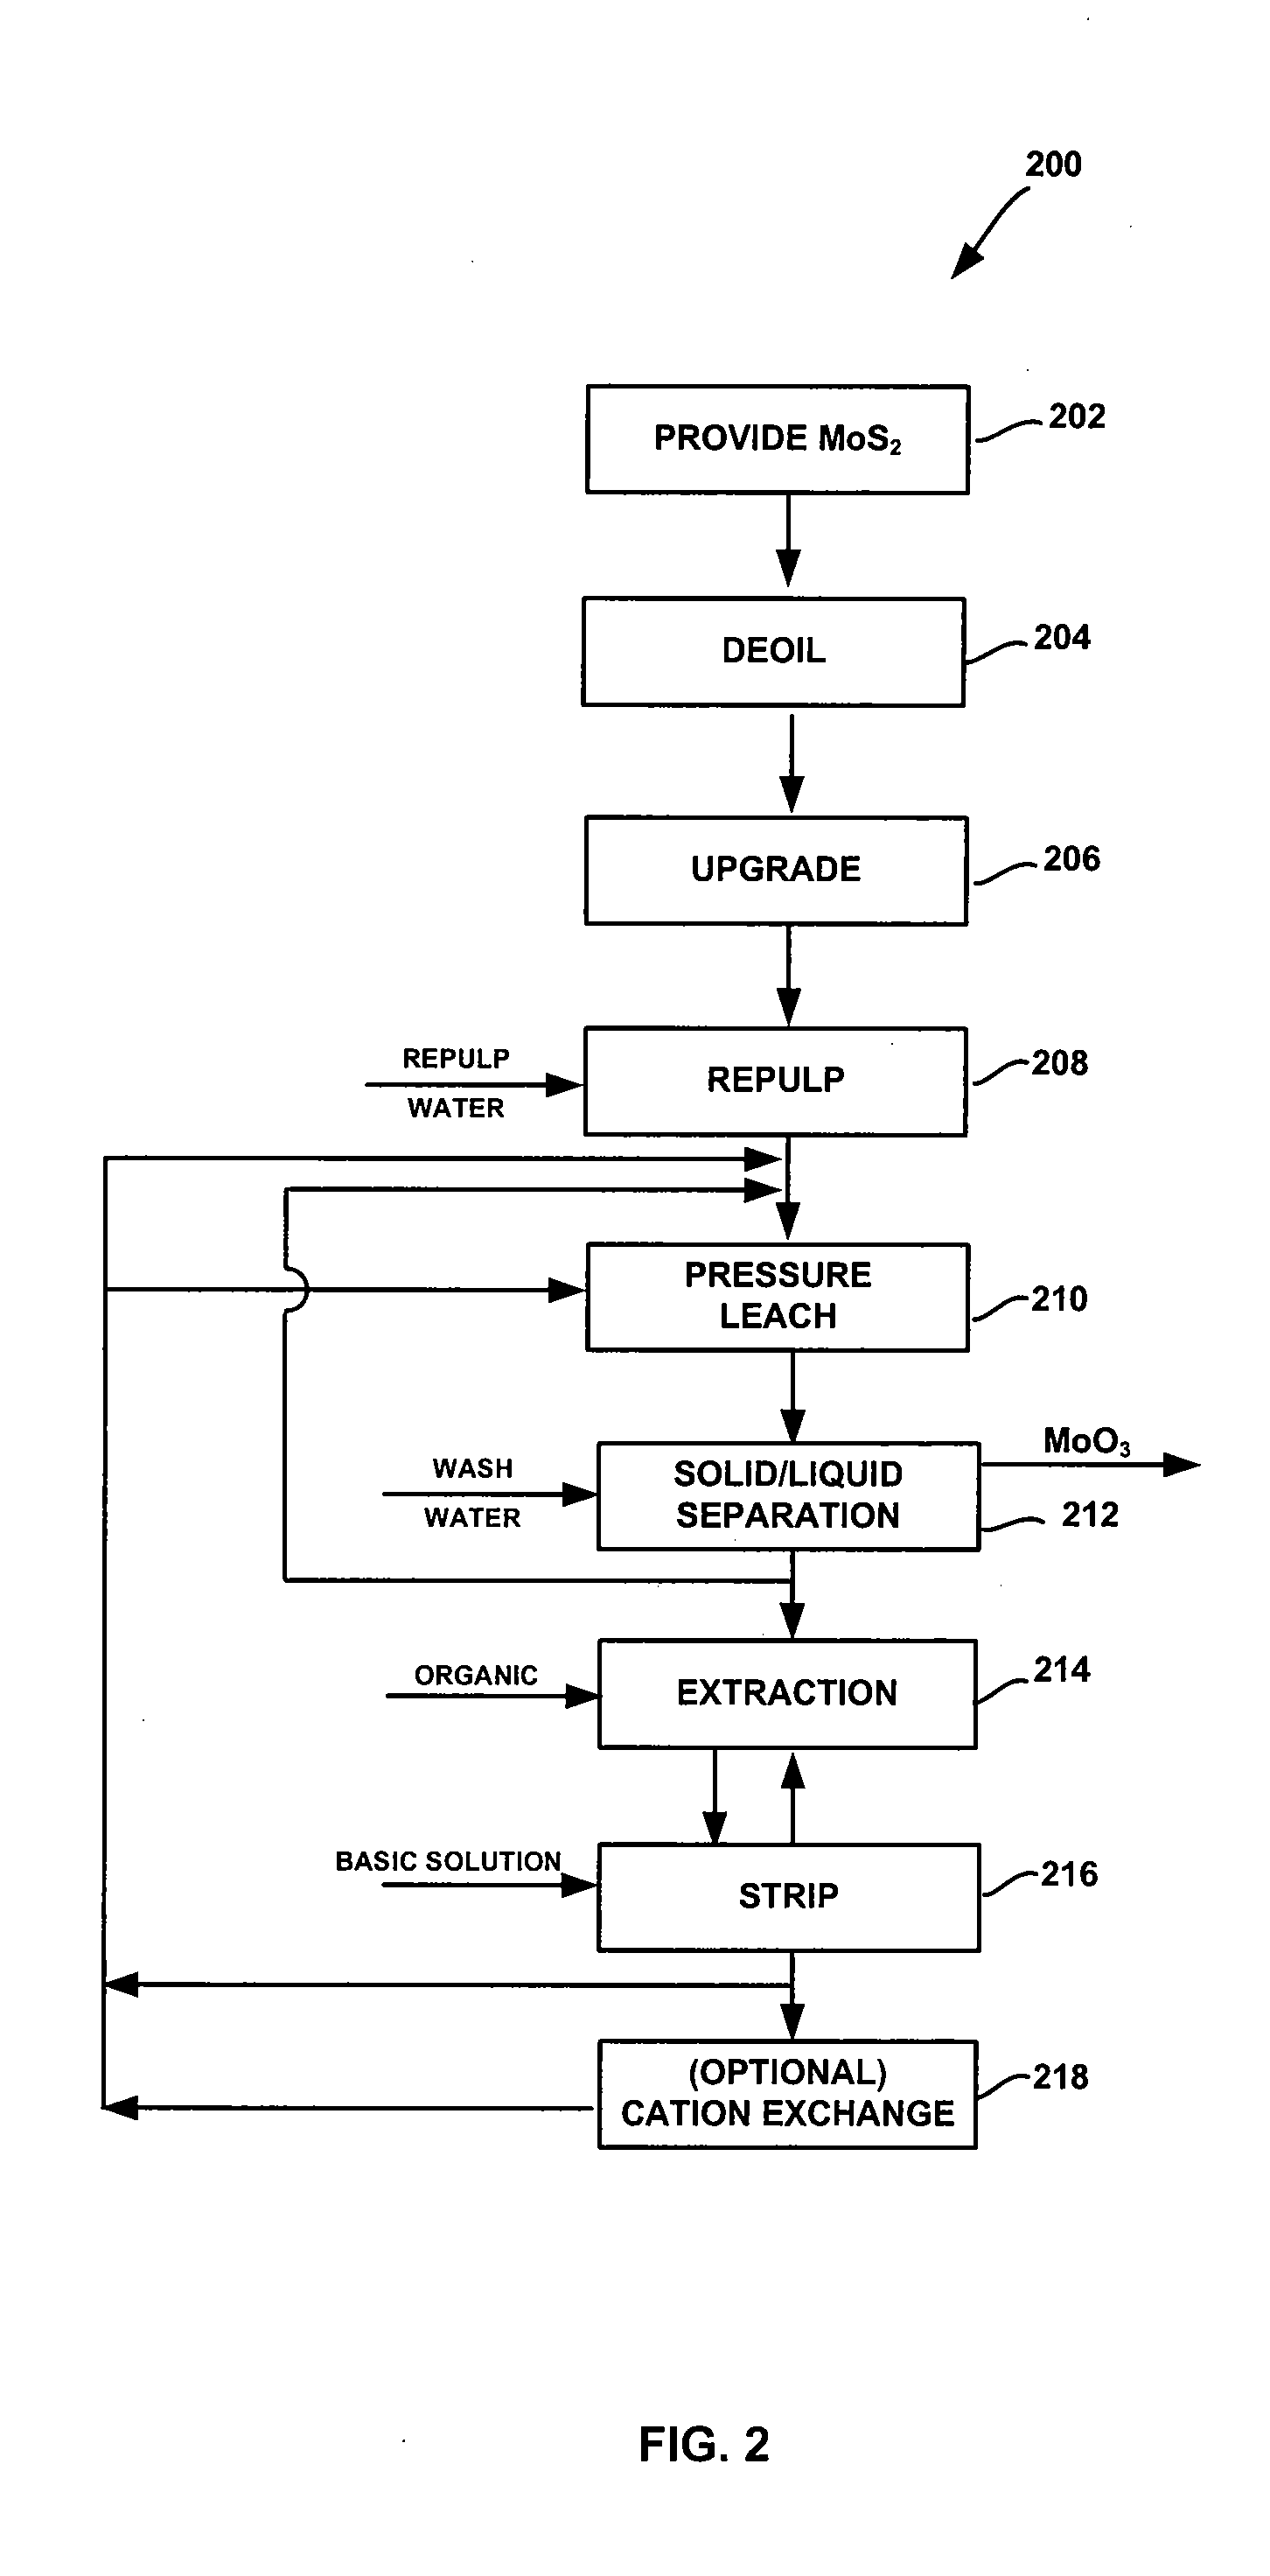 System and method for conversion of molybdenite to one or more molybdenum oxides